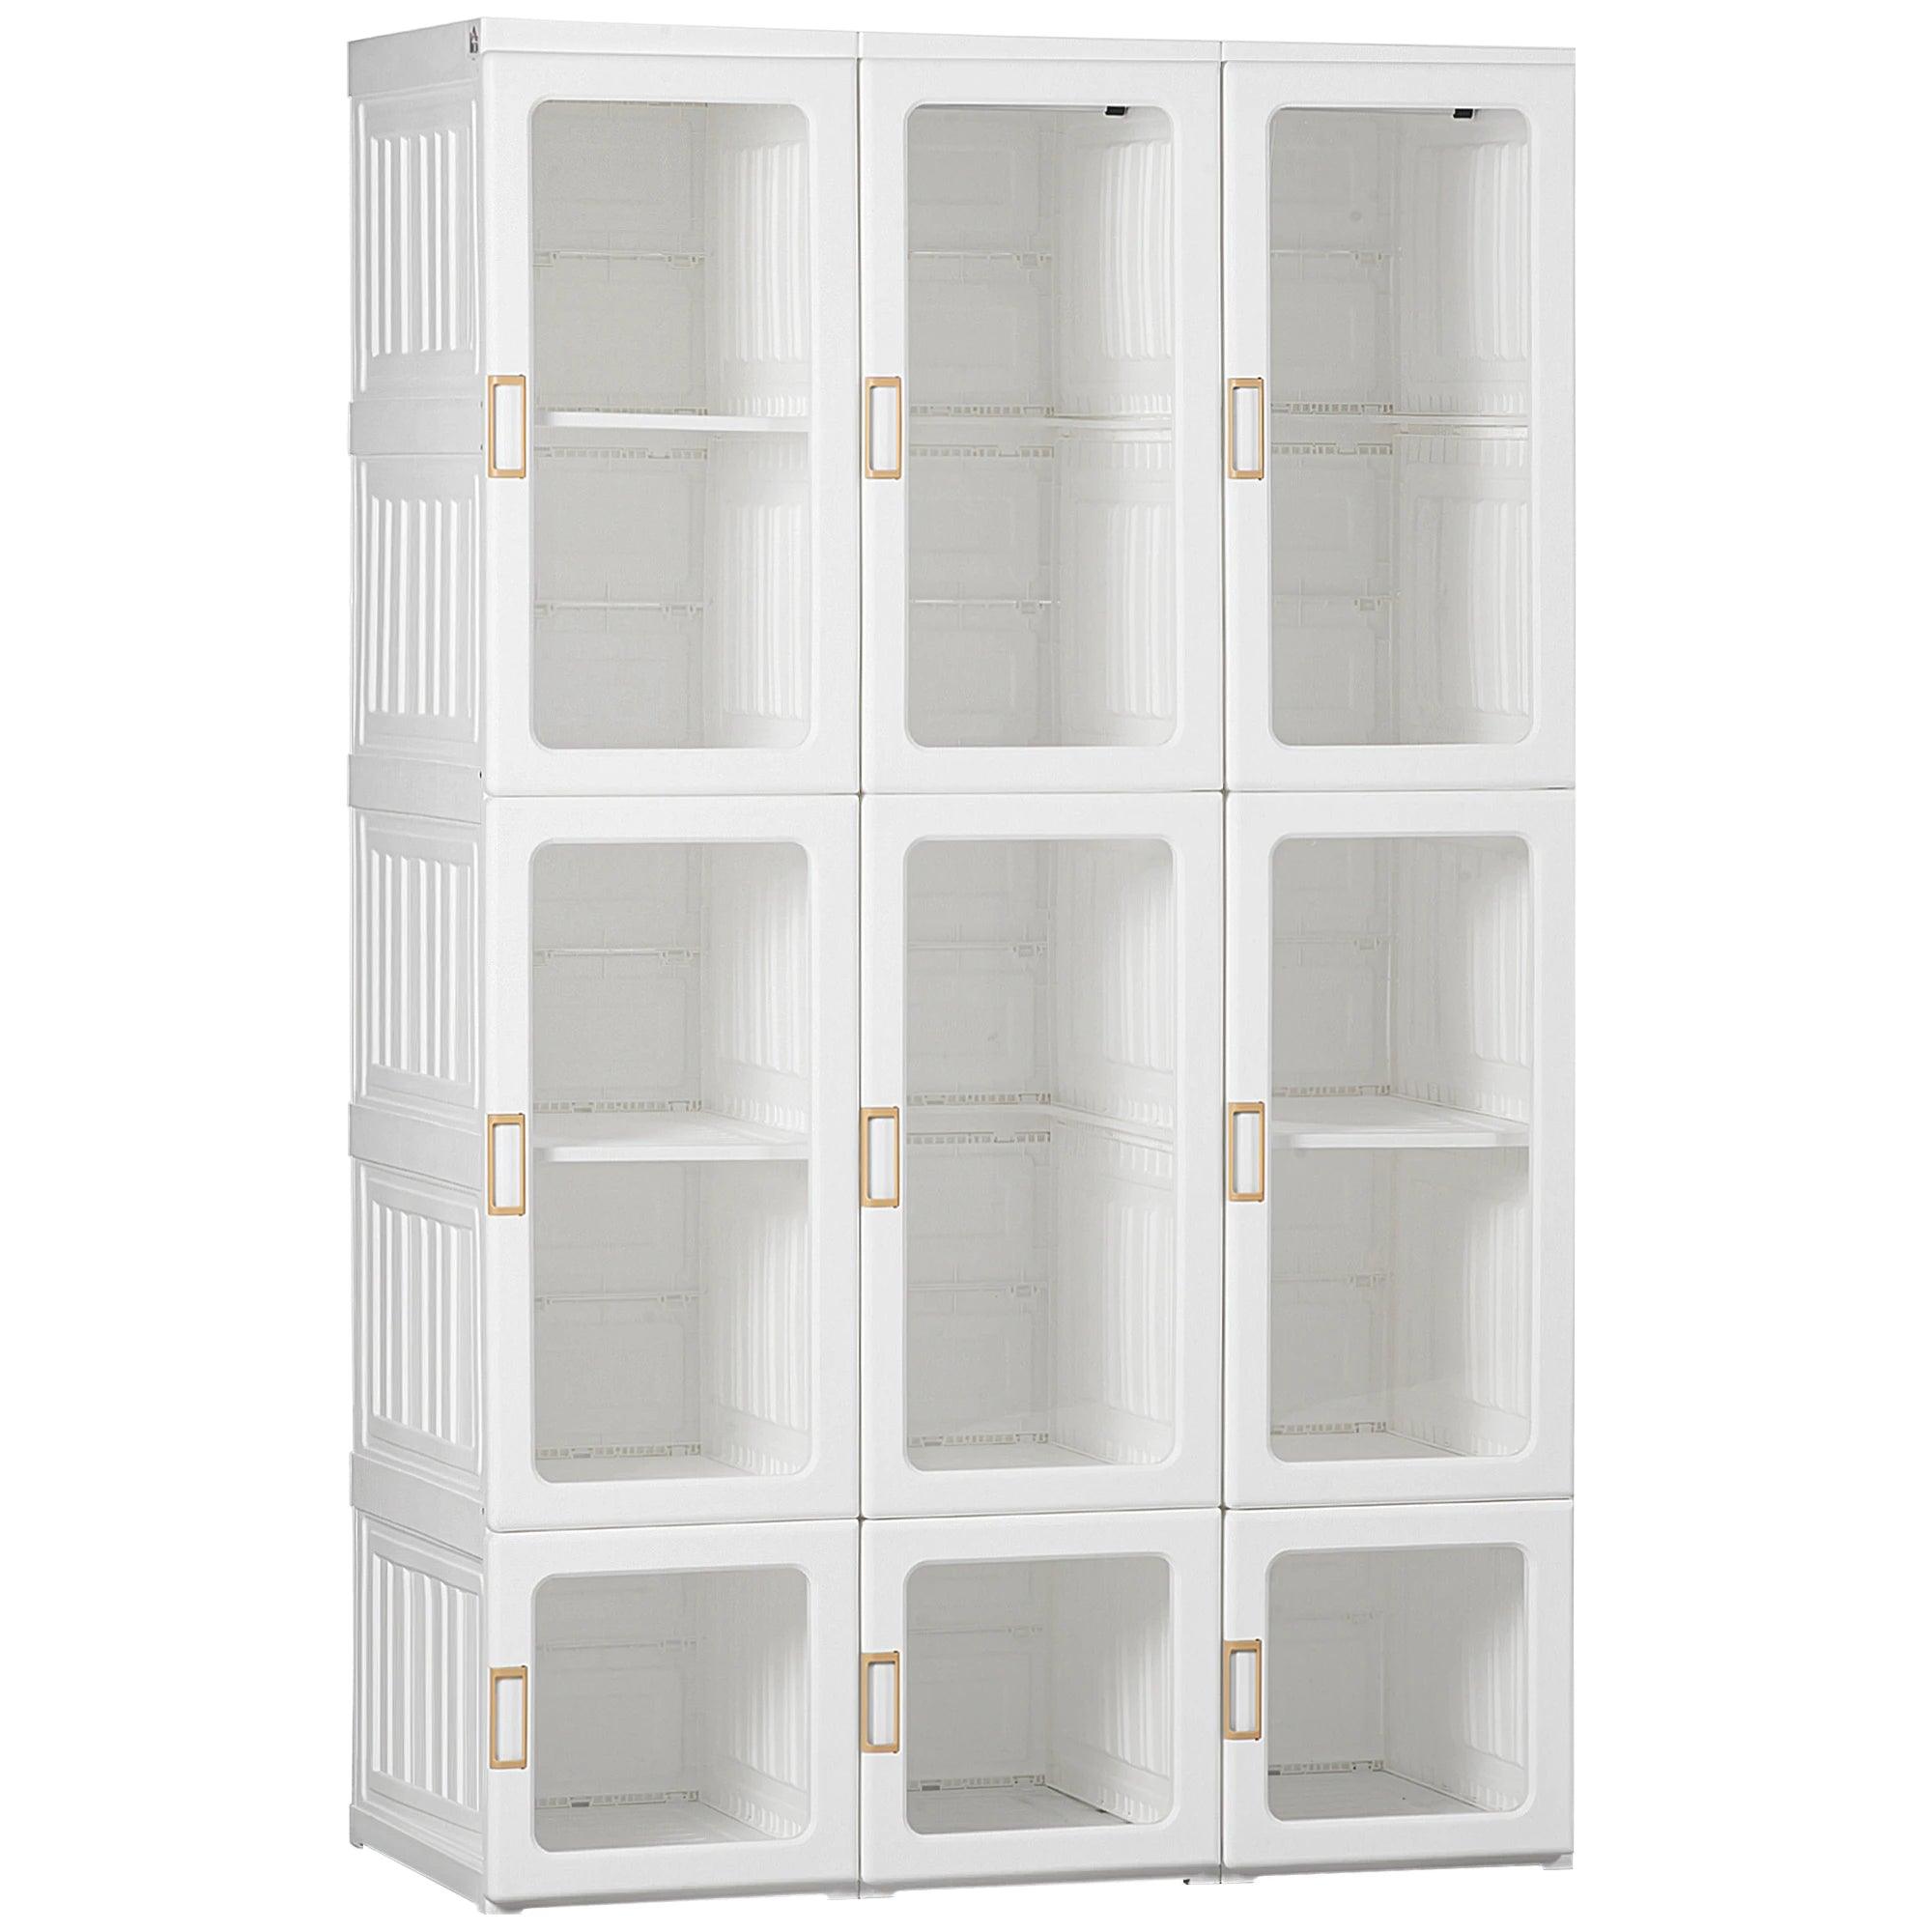 Portable Wardrobe Closet, Bedroom Armoire, Foldable Clothes Organizer with Cube Storage, Hanging Rods, Magnet Doors, White